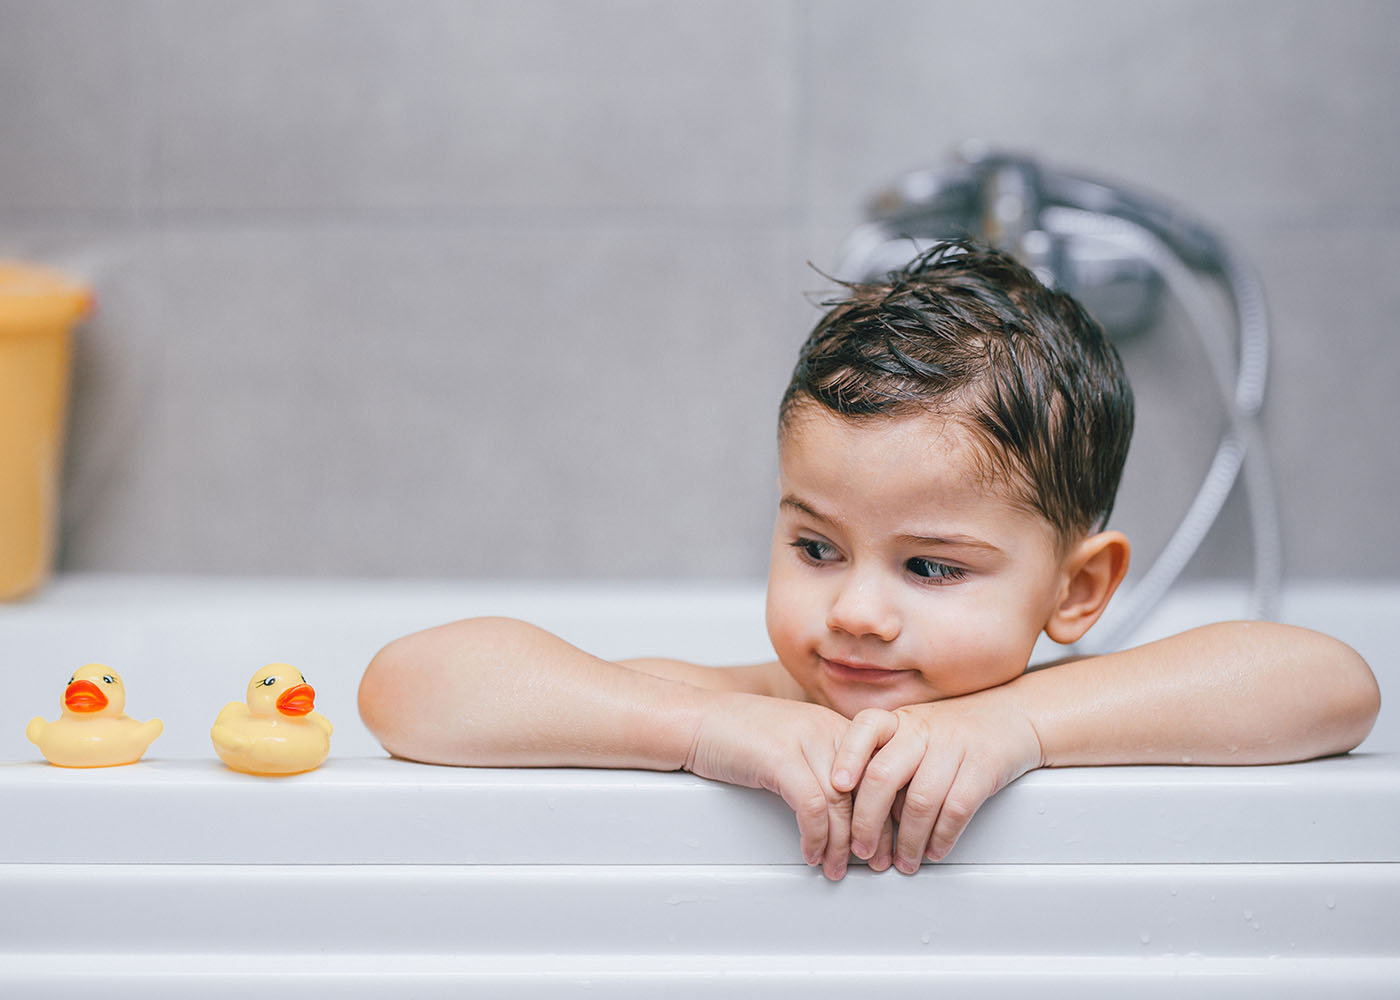 Bathtime Floating - Under 3's Healthy Hearts and Minds